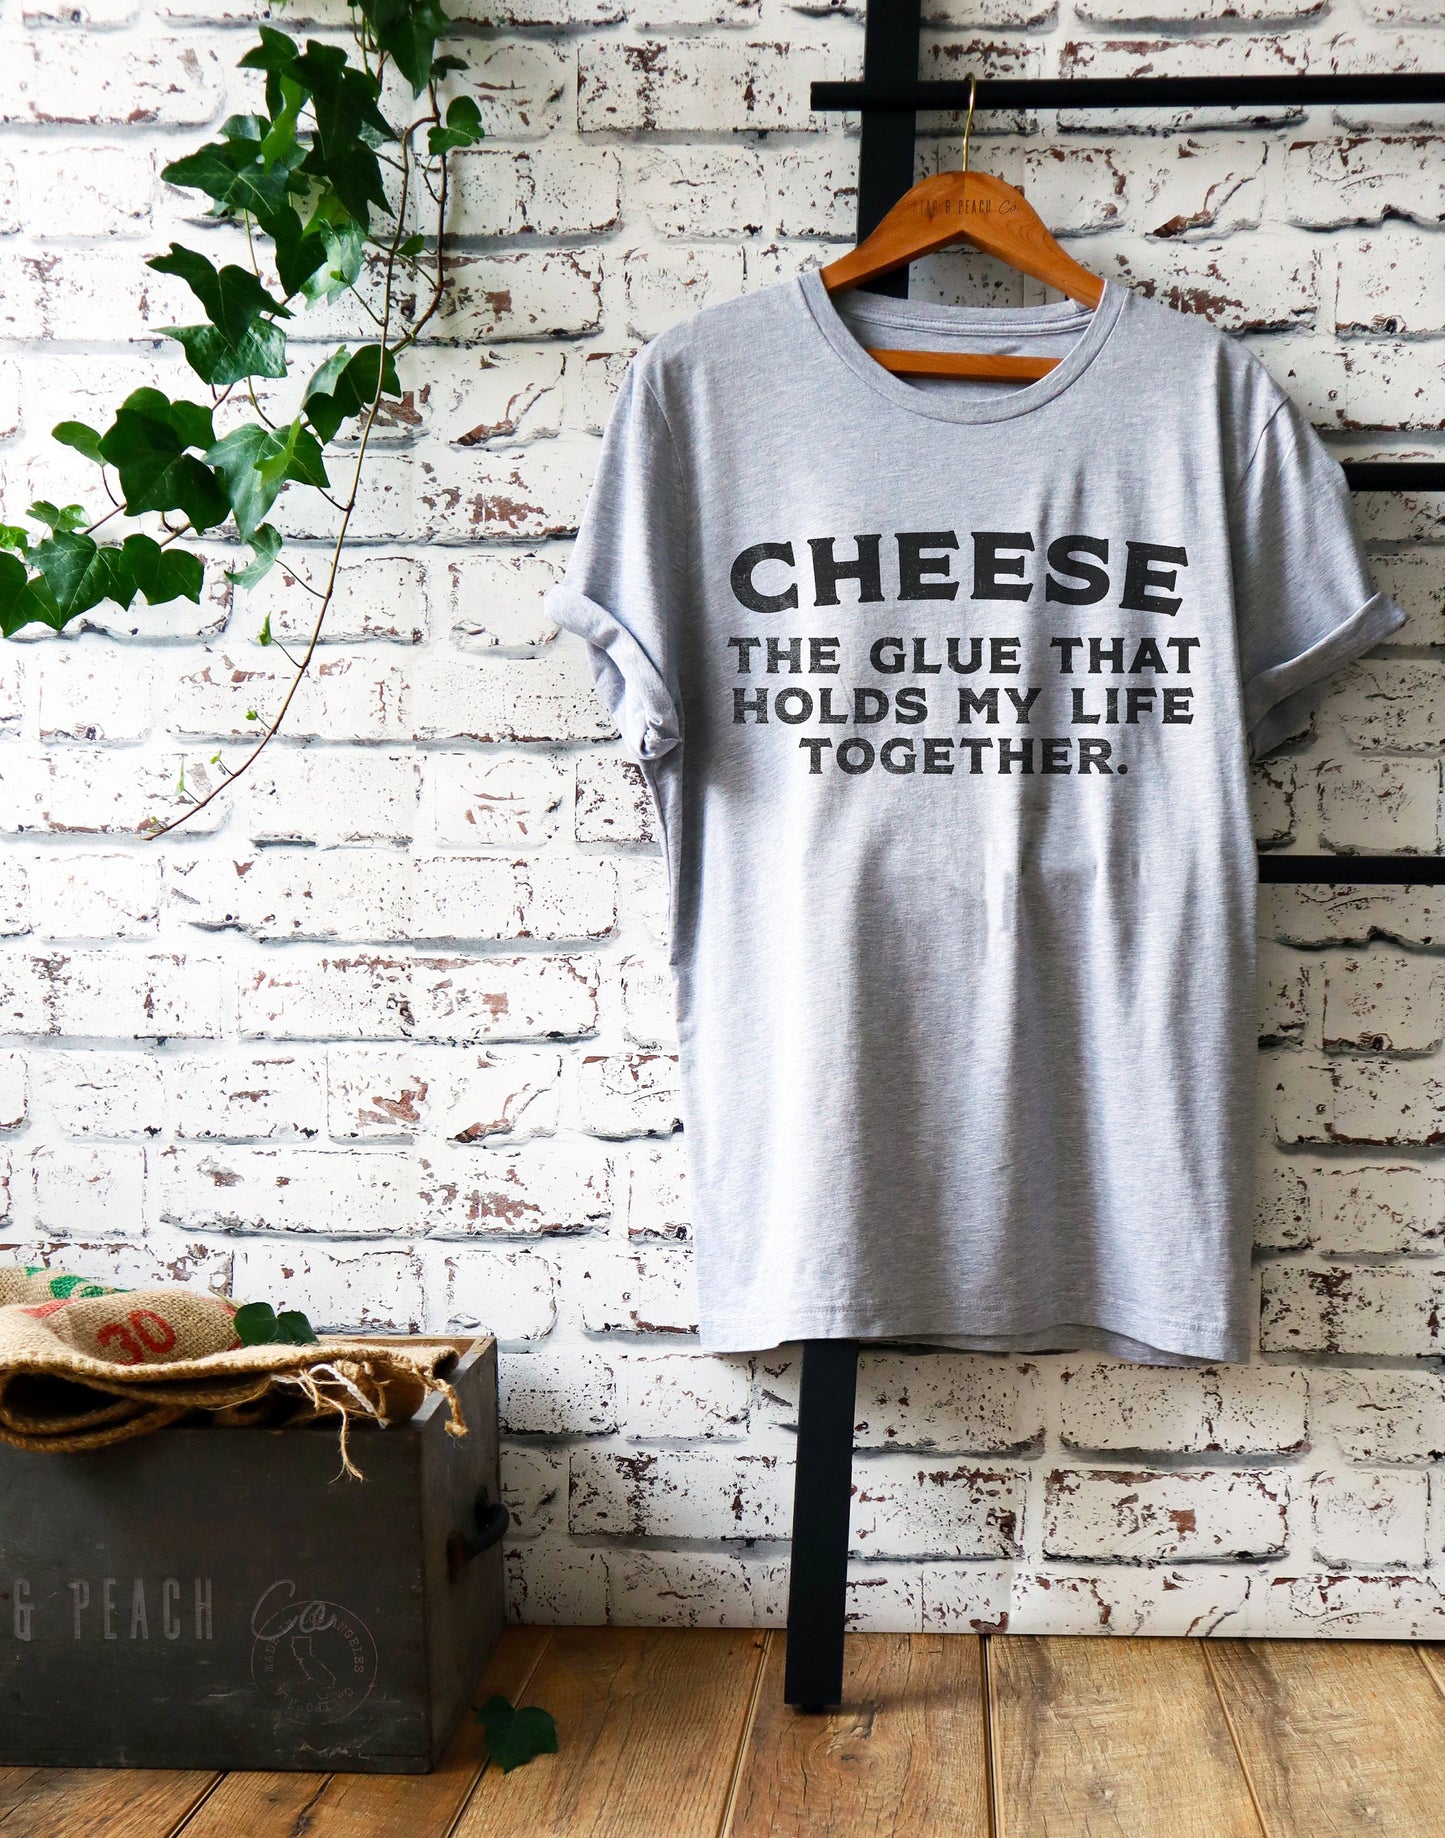 Cheese The Glue That Holds My Life Together Unisex Shirt - Cheese Shirt, Cheese Lover, Foodie Gift, Foodie Shirt, Chef Gift, Funny Food Gift